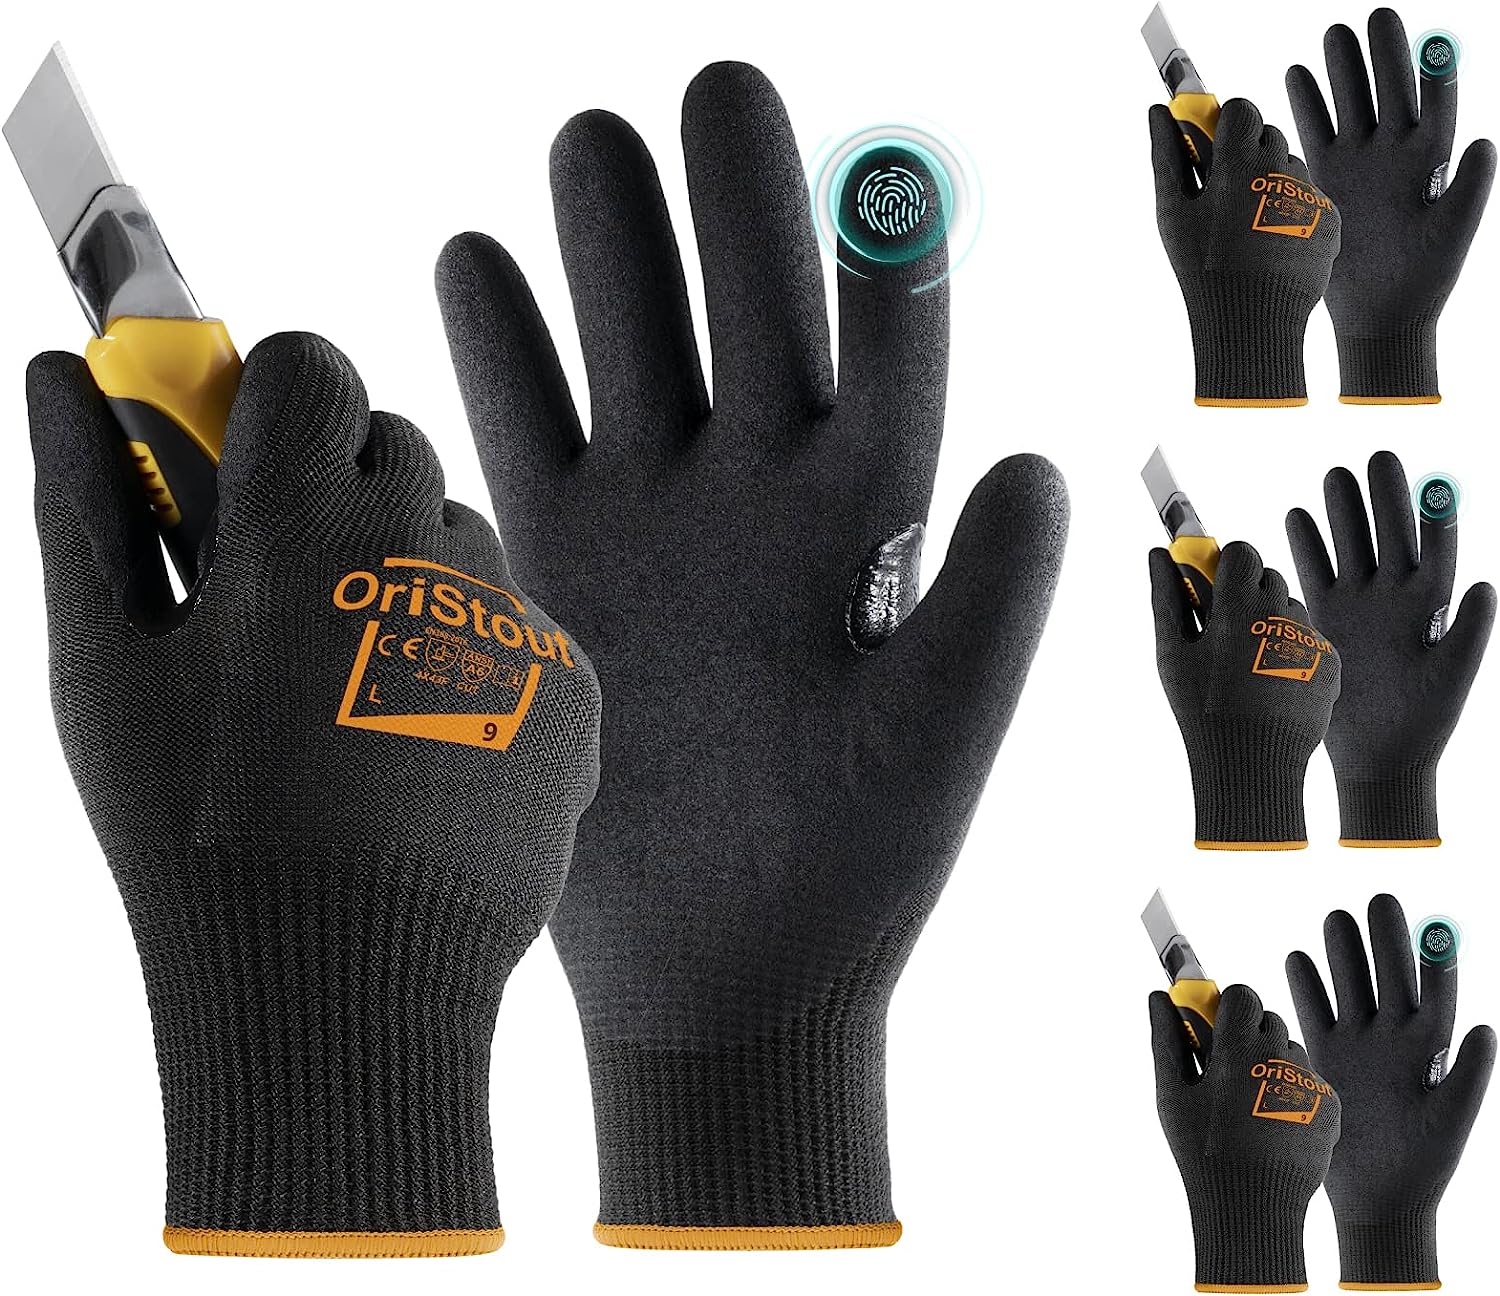 toolant Work Gloves for Men 12 Pairs, Nitrile Work Gloves with